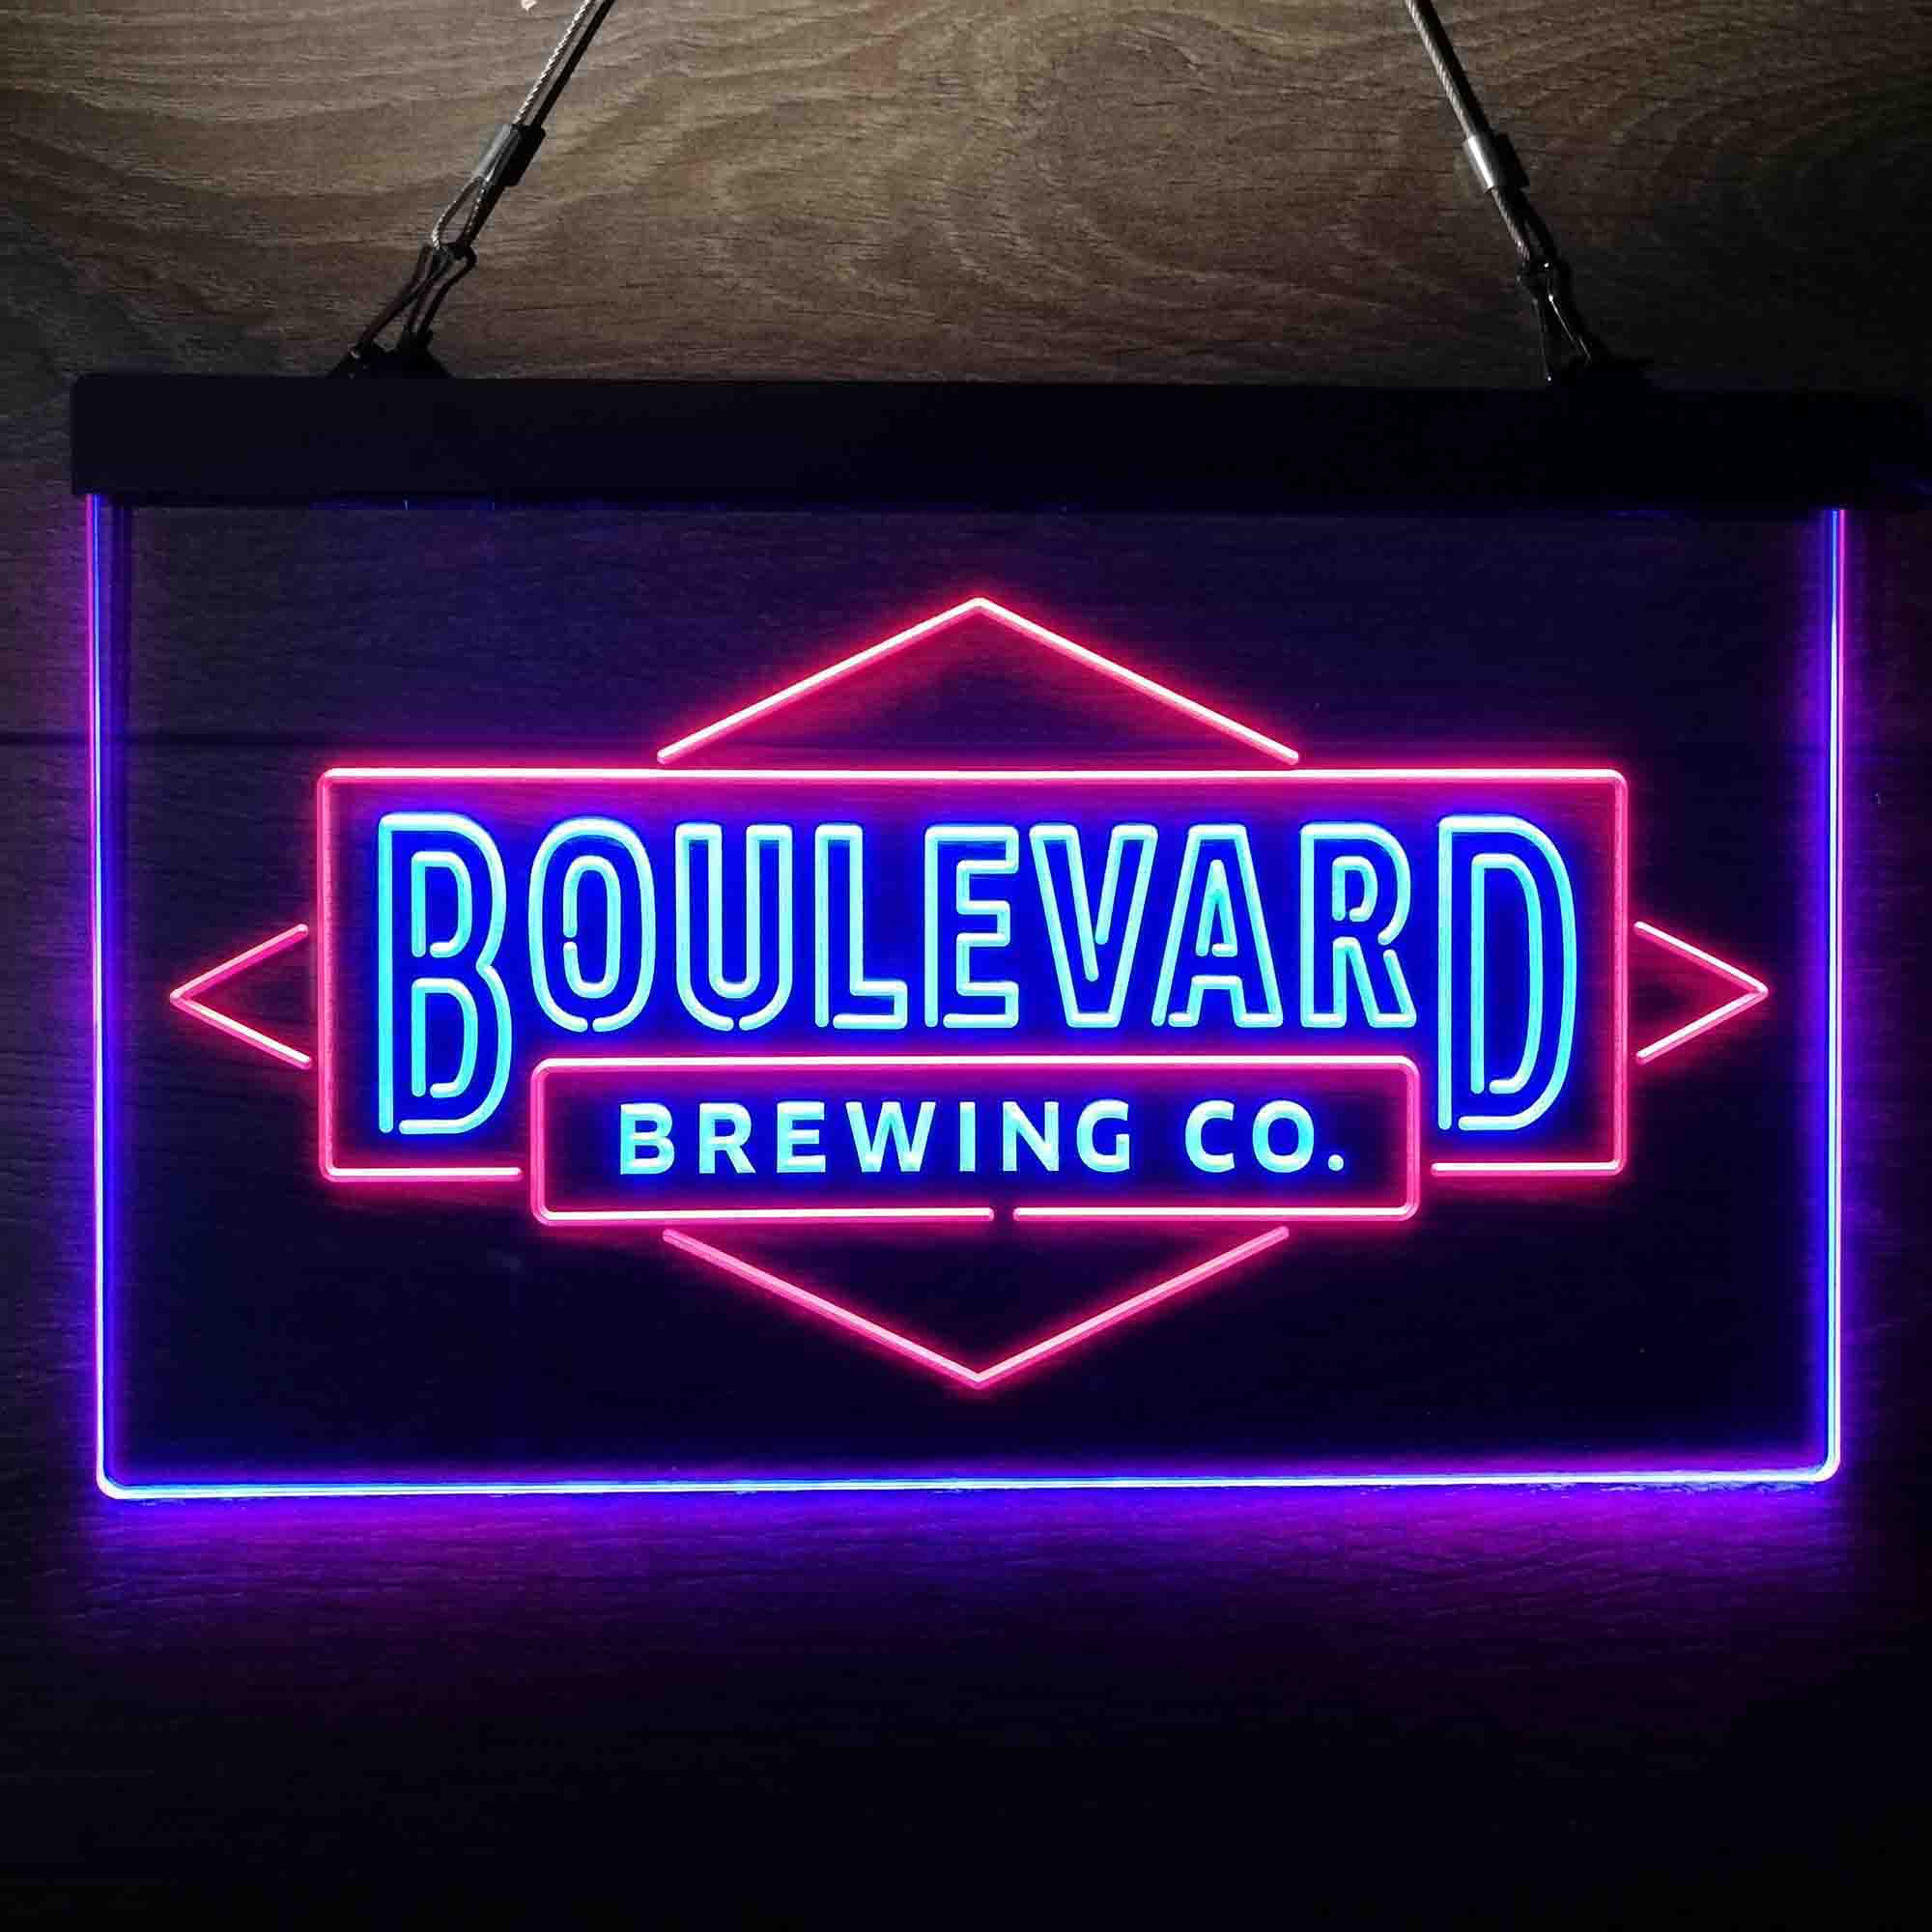 Boulevard Brewing Co. LED Neon Sign